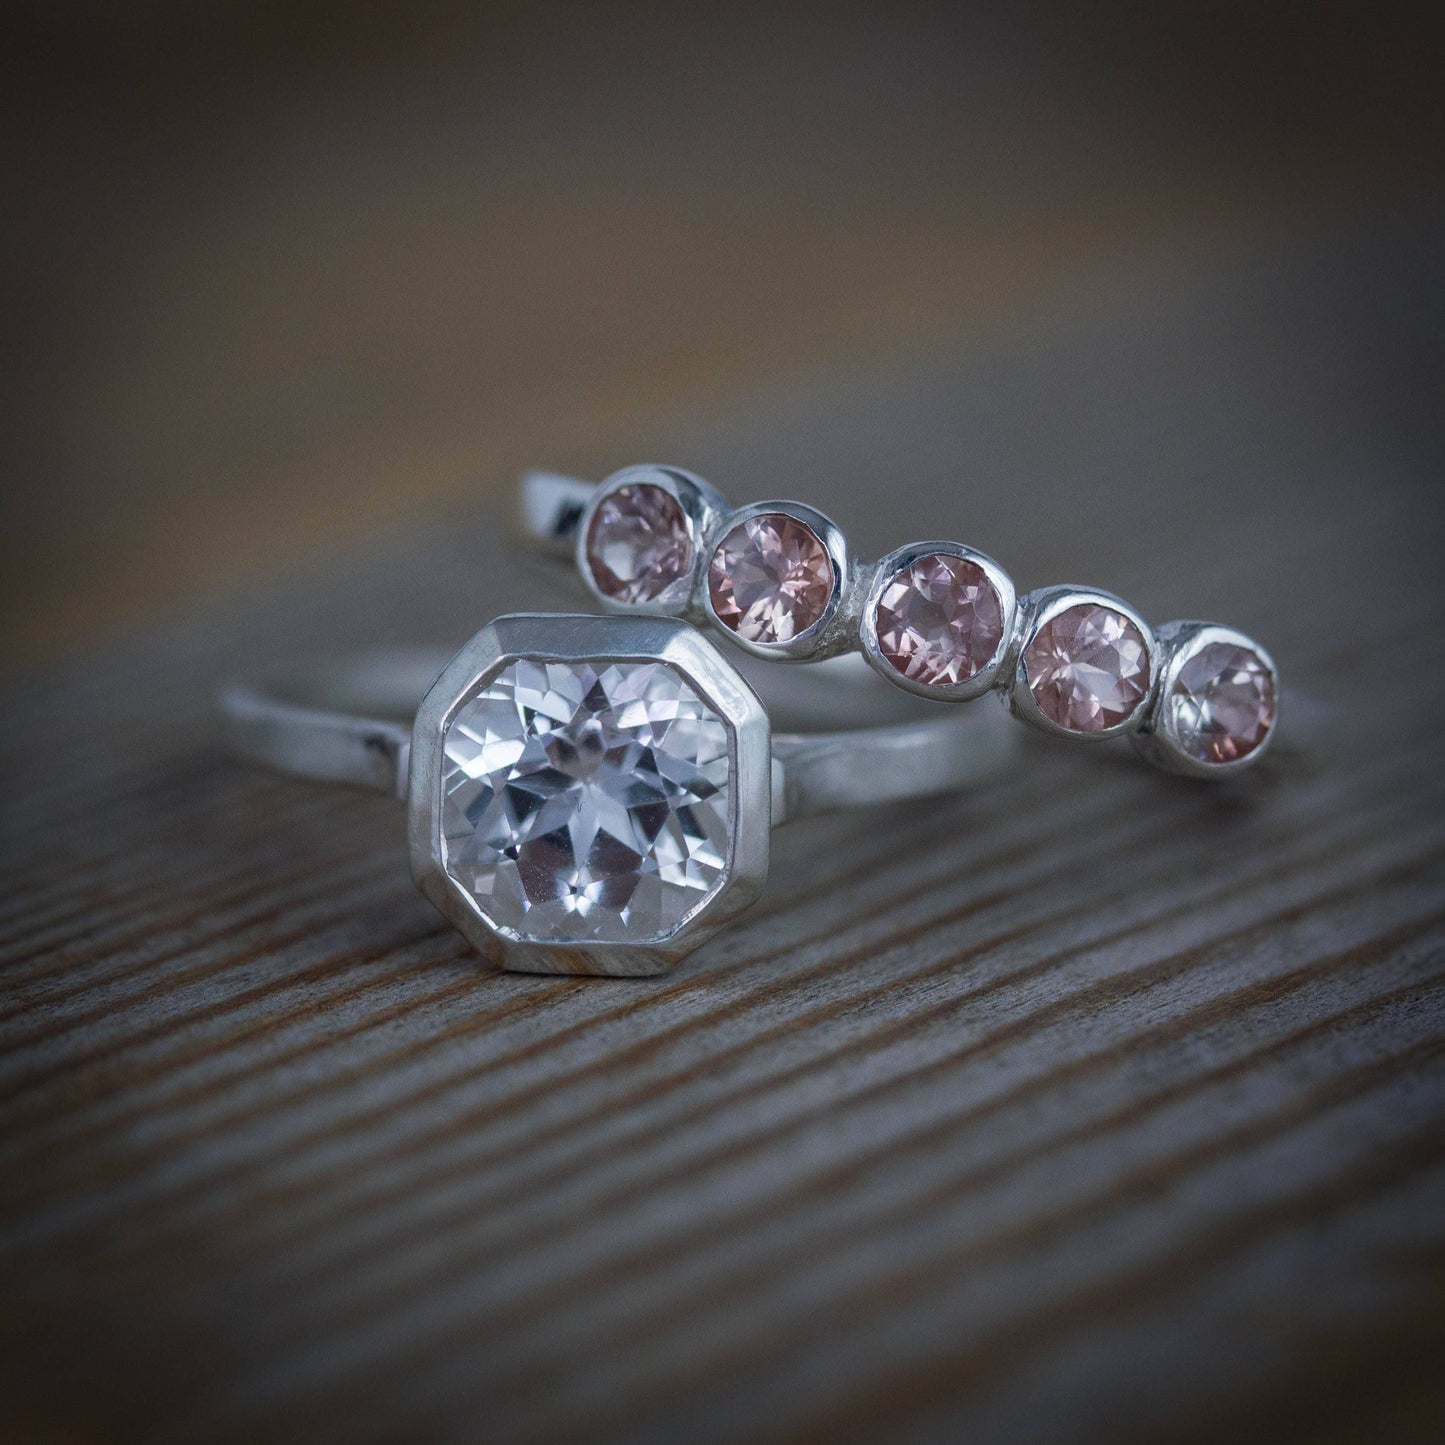 A handmade Oregon Sunstone band ring with pink sapphires by Cassin Jewelry.